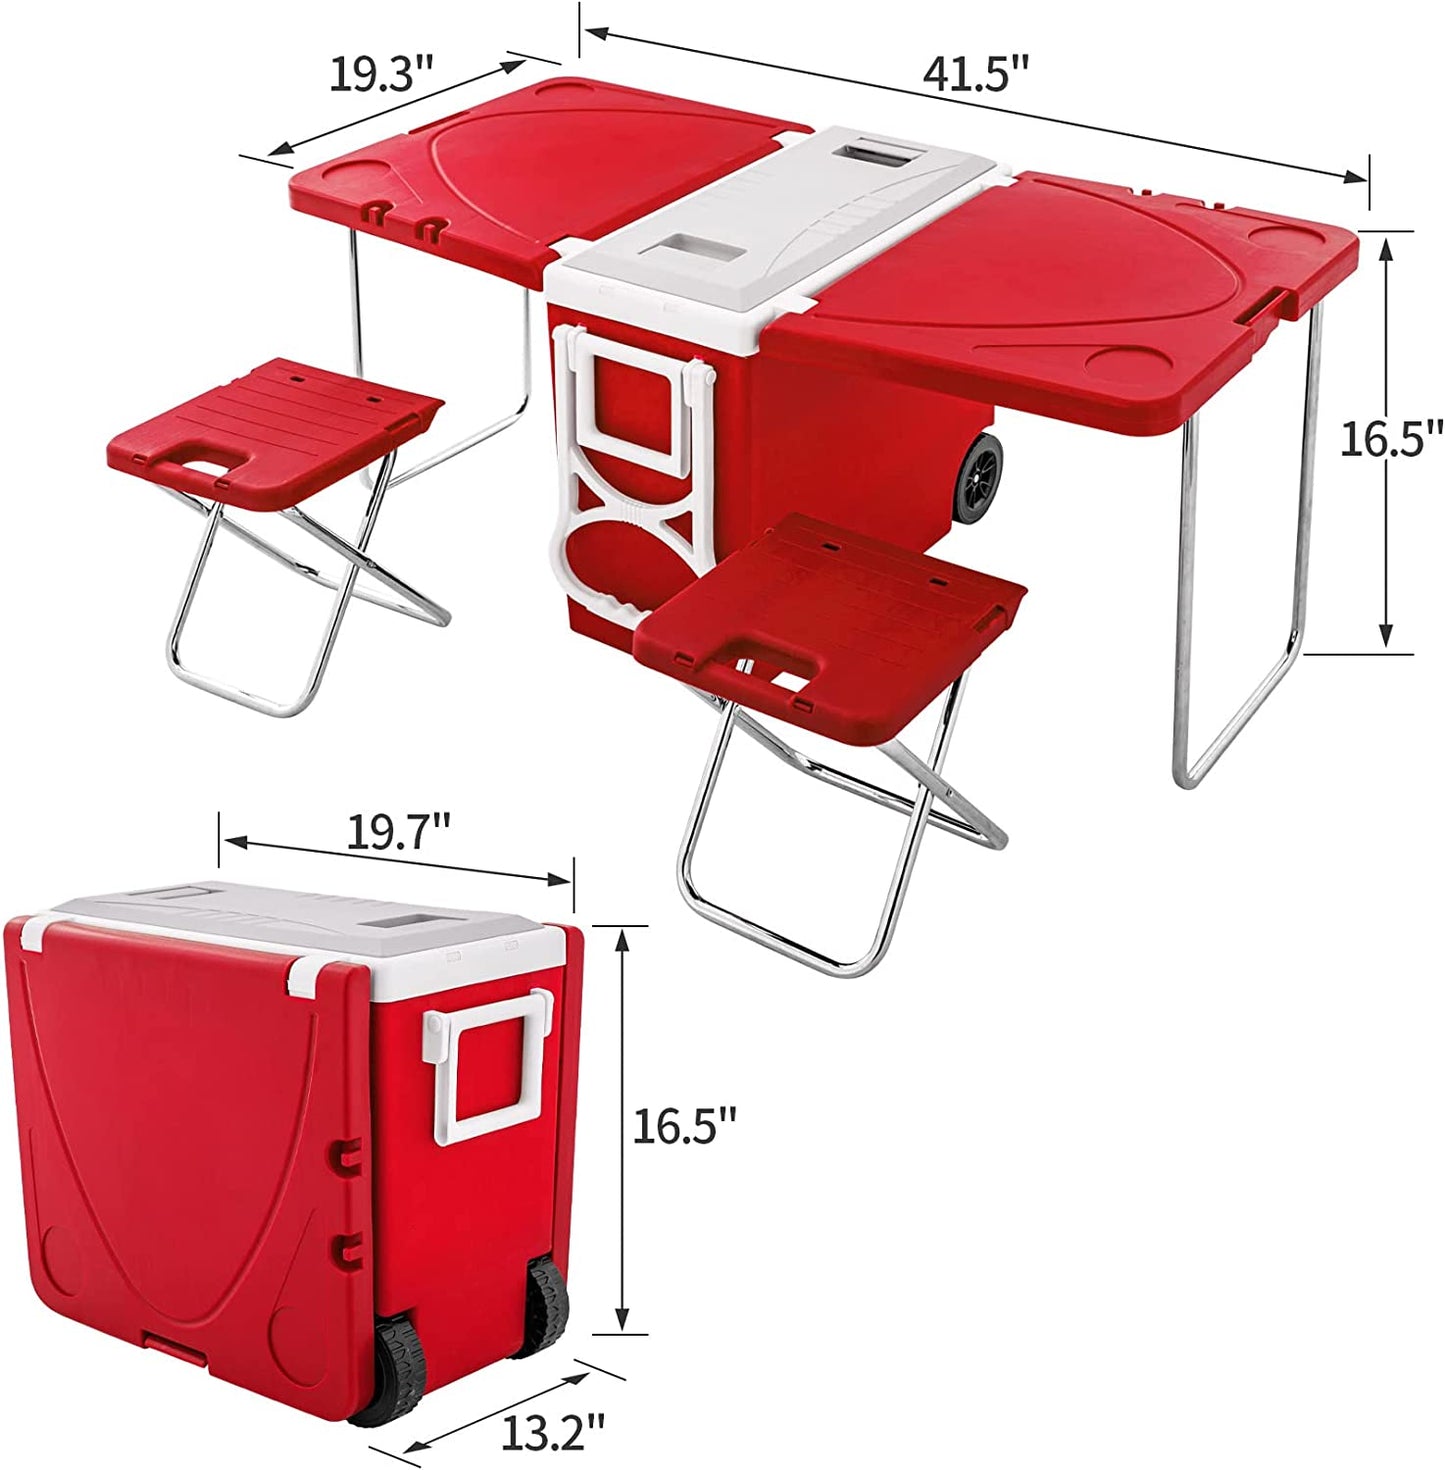 UNICOO - Multi-Function Rolling Cooler Picnic Camping Outdoor W/Table & 2 Chairs, Outdoor Picnic Foldable Upgraded Stool, Heat Insulation Box